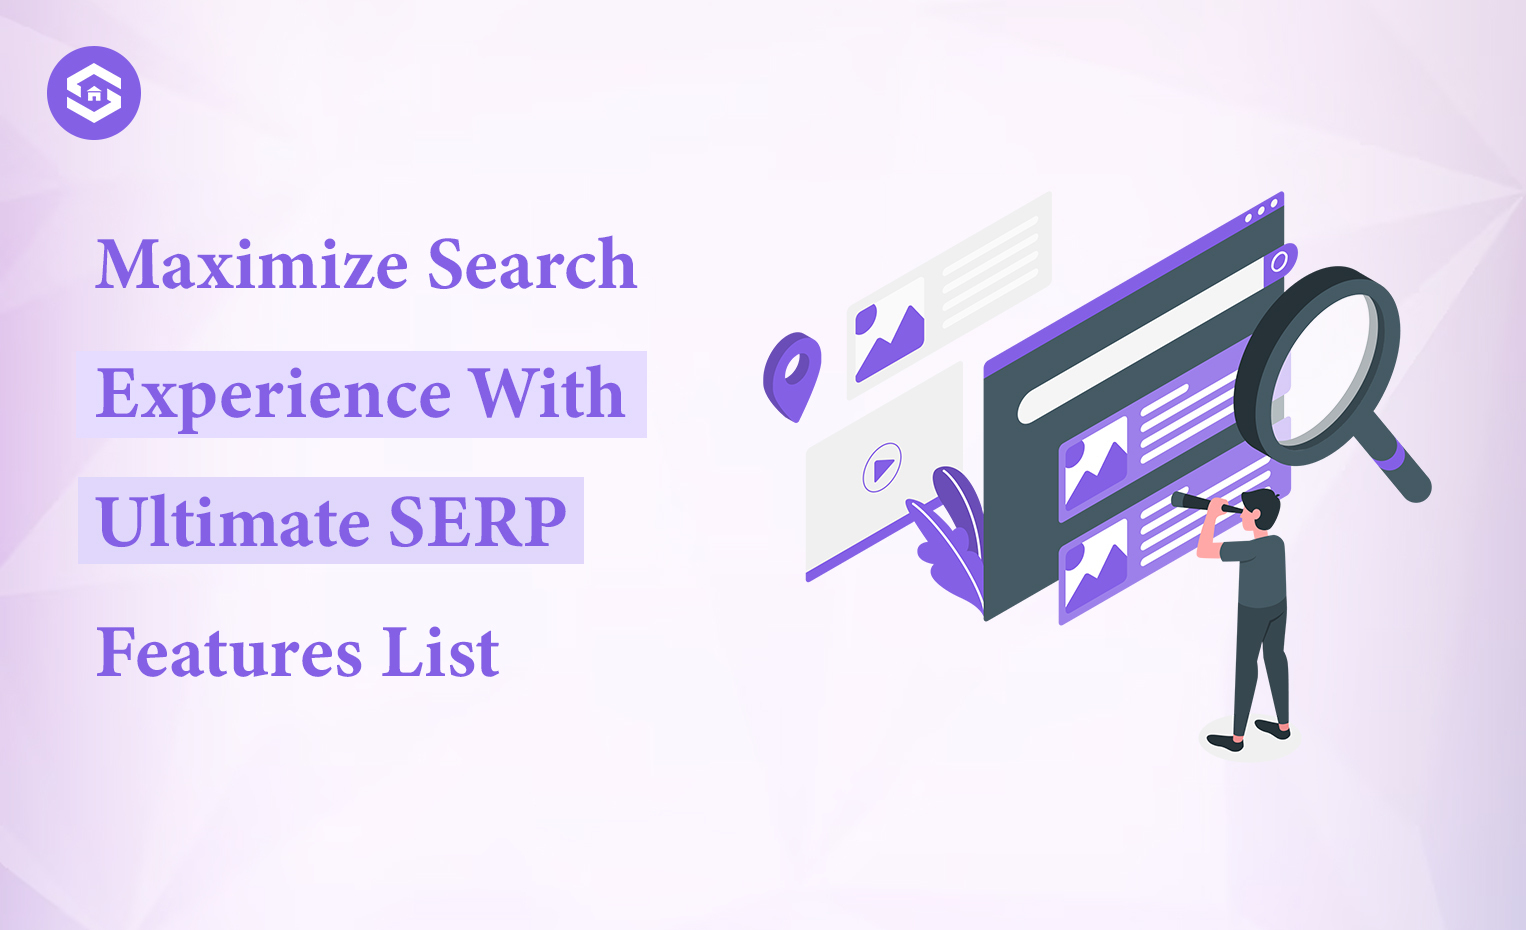 Ultimate SERP Features List for Better Search Experience